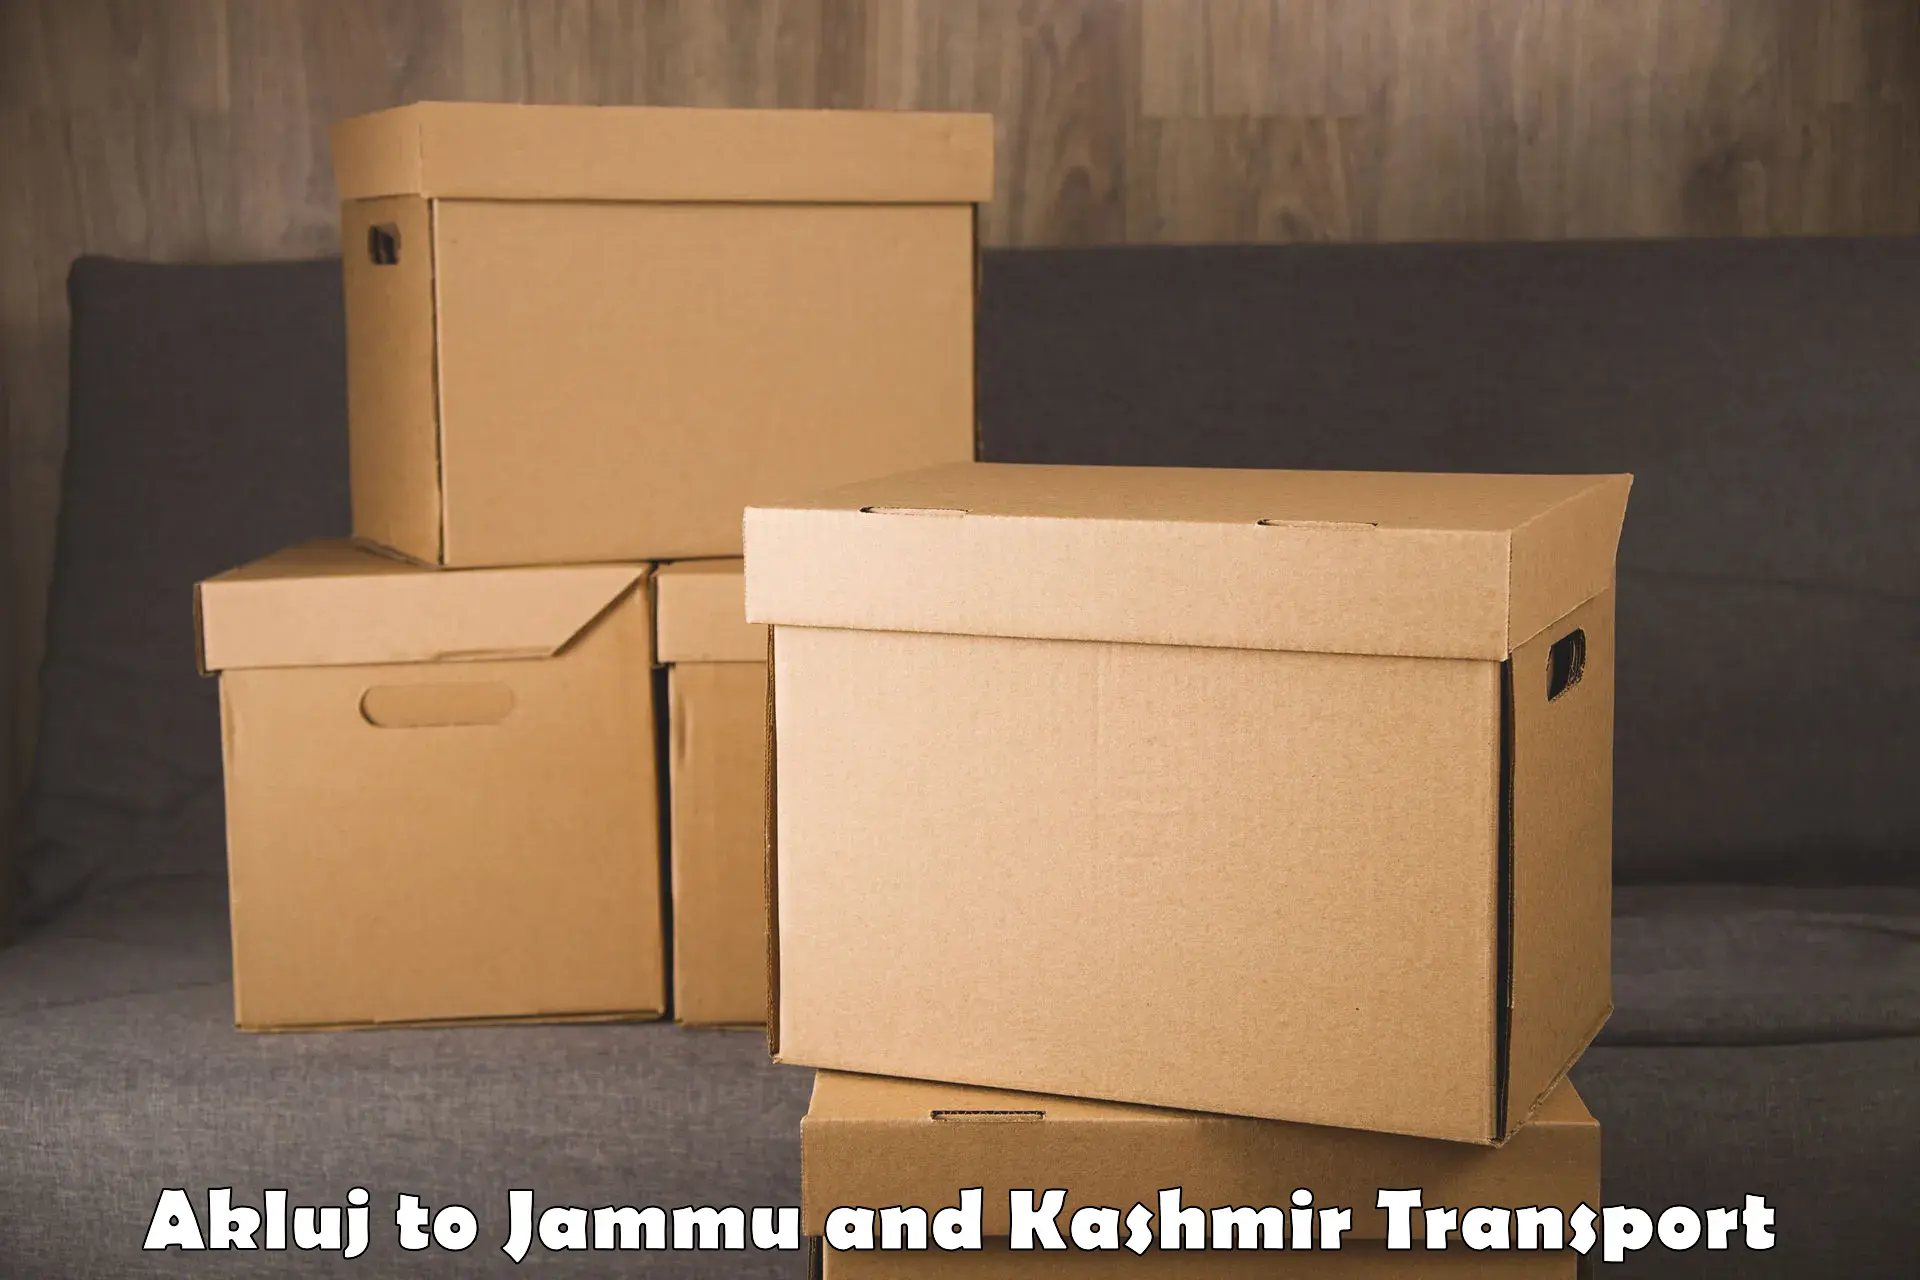 Transport bike from one state to another Akluj to Jammu and Kashmir